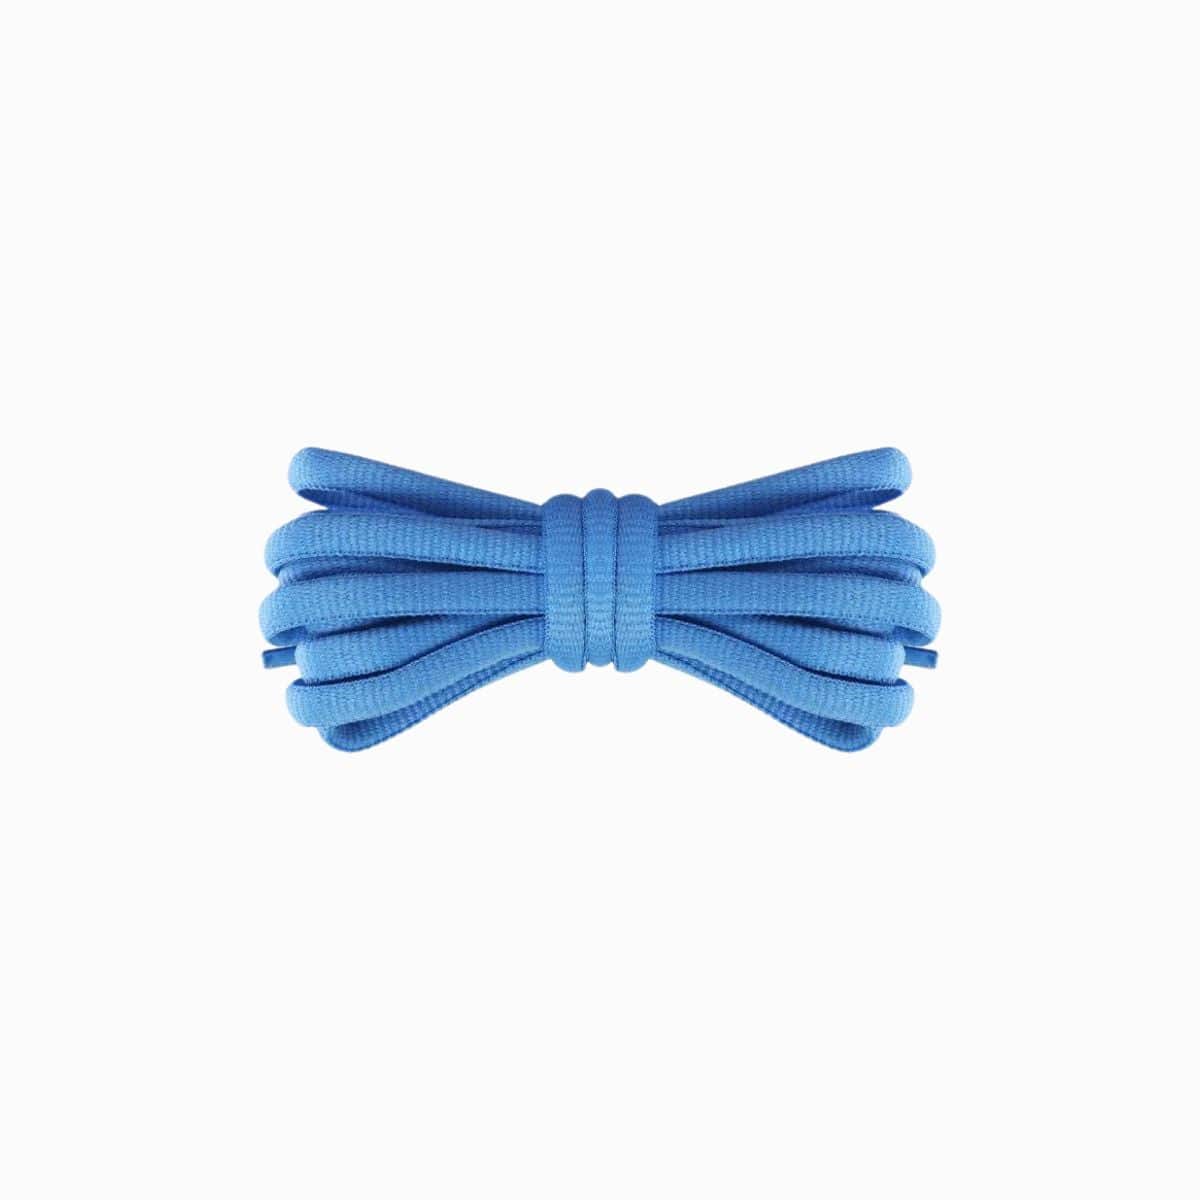 Sky Blue Replacement Adidas Shoe Laces for Adidas Spezial Sneakers by Kicks Shoelaces